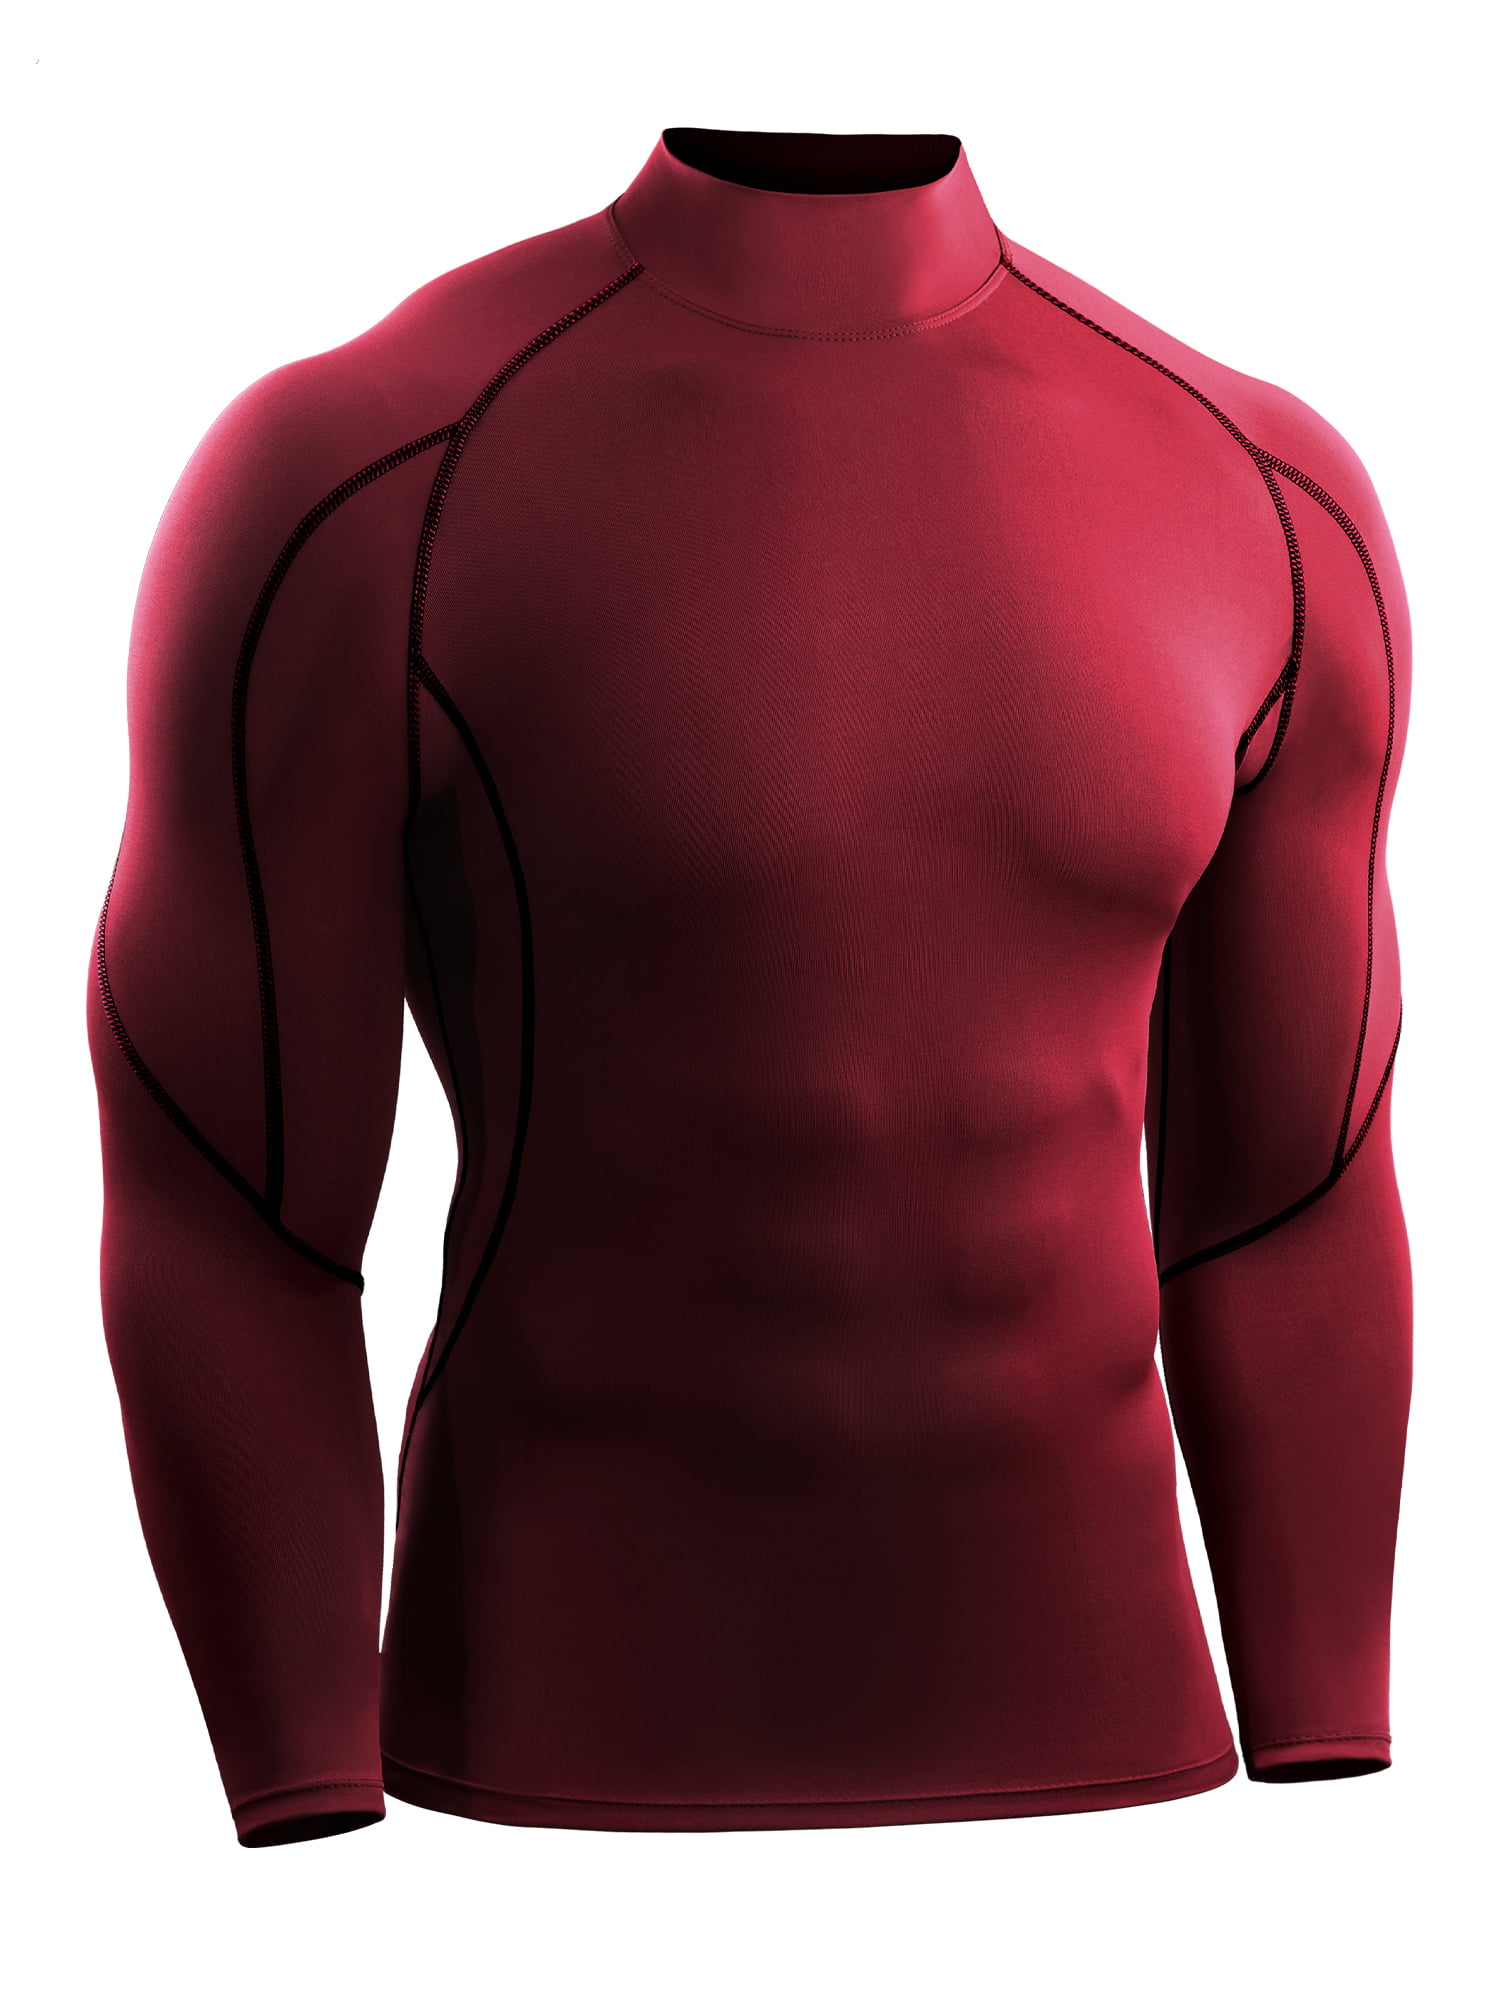 Mens Long Sleeve Base Layer Top Compression Armour Top Thermal Gym Sports Shirt 